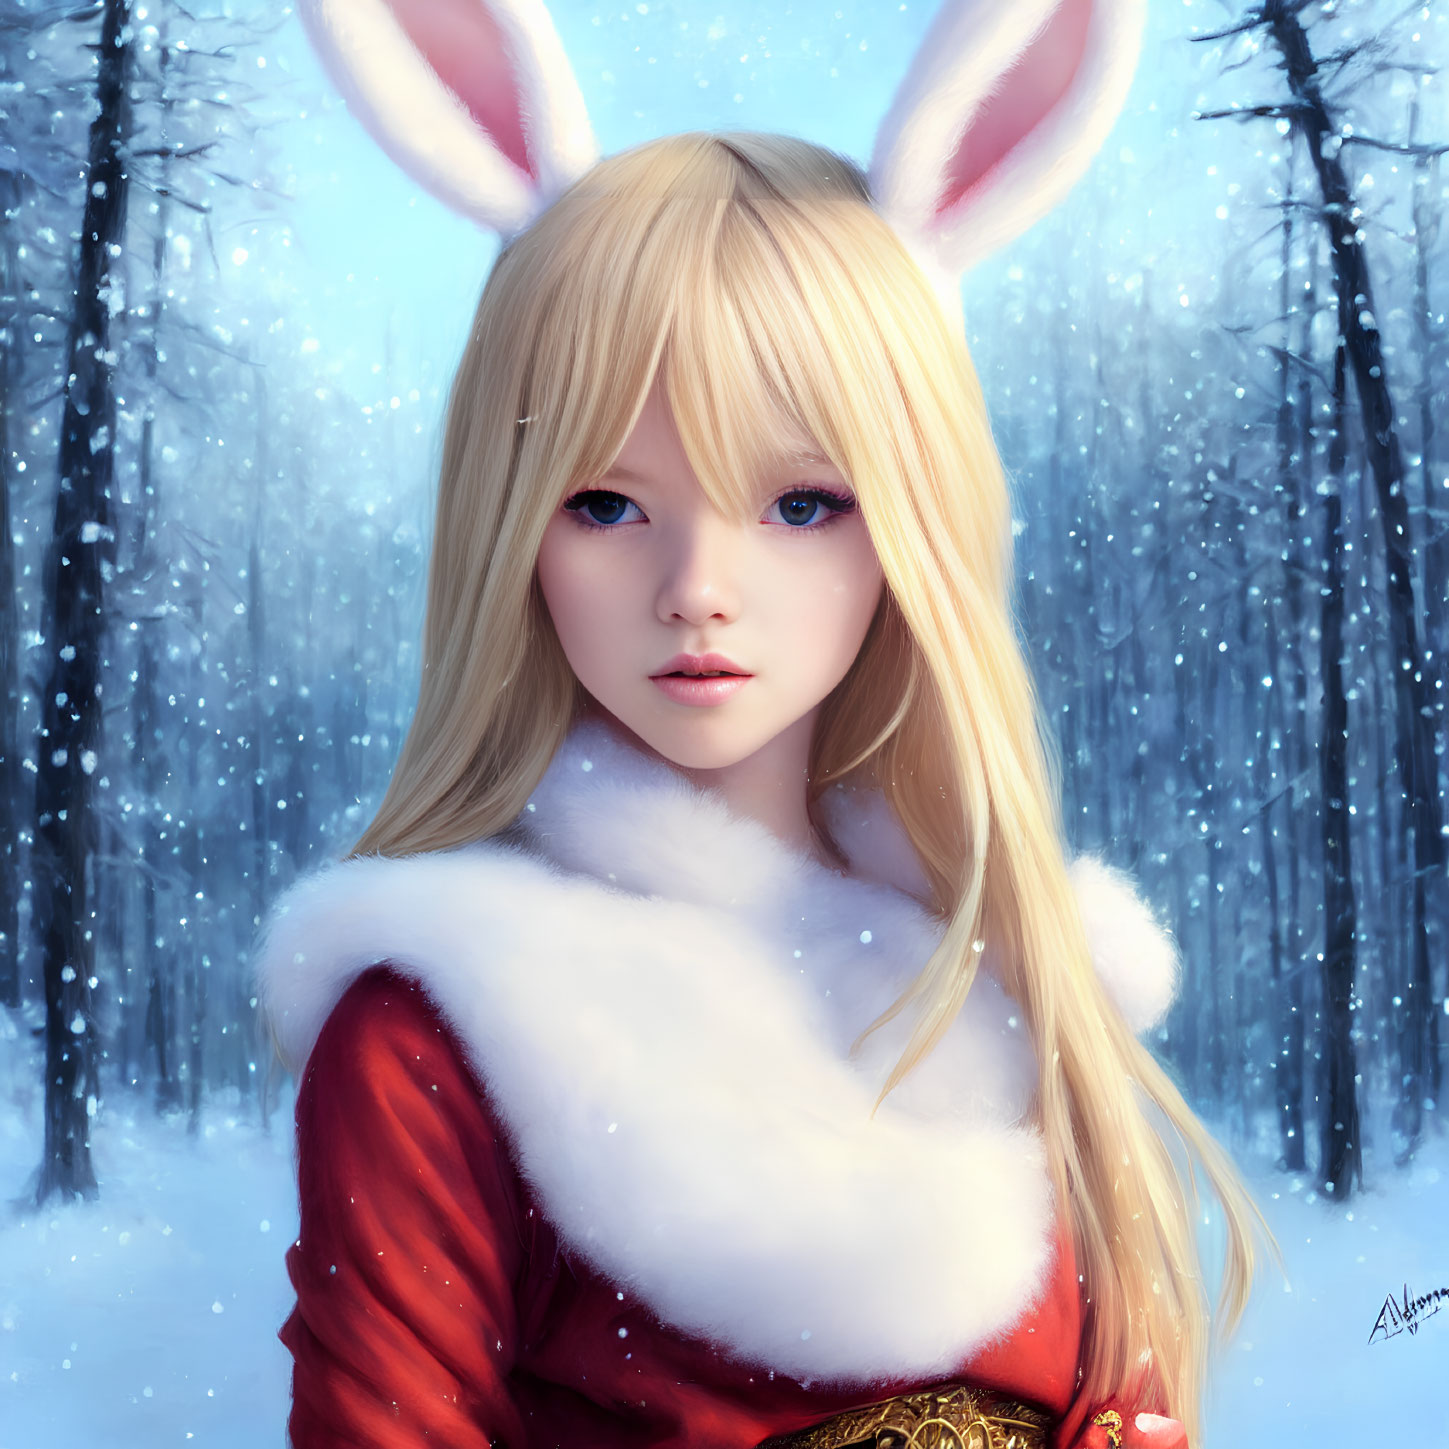 Blond person in red furry outfit with rabbit ears in snowy forest